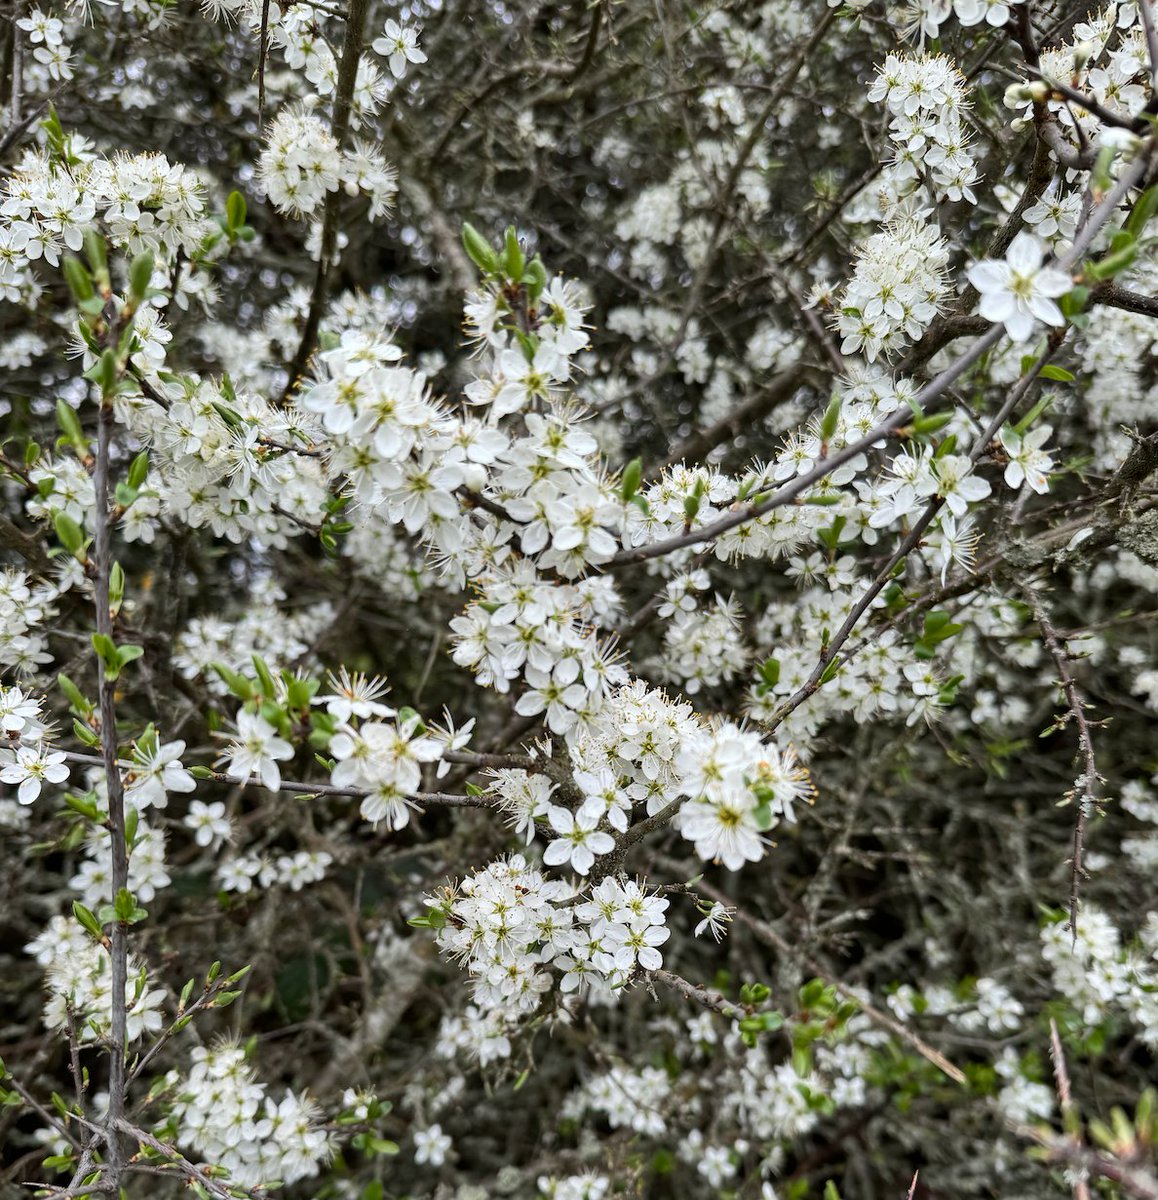 Blossom foaming in the hedgerows, brightening a dreary day. Blackthorn flowers. #Spring #Blossom #Nature #NaturePhotography